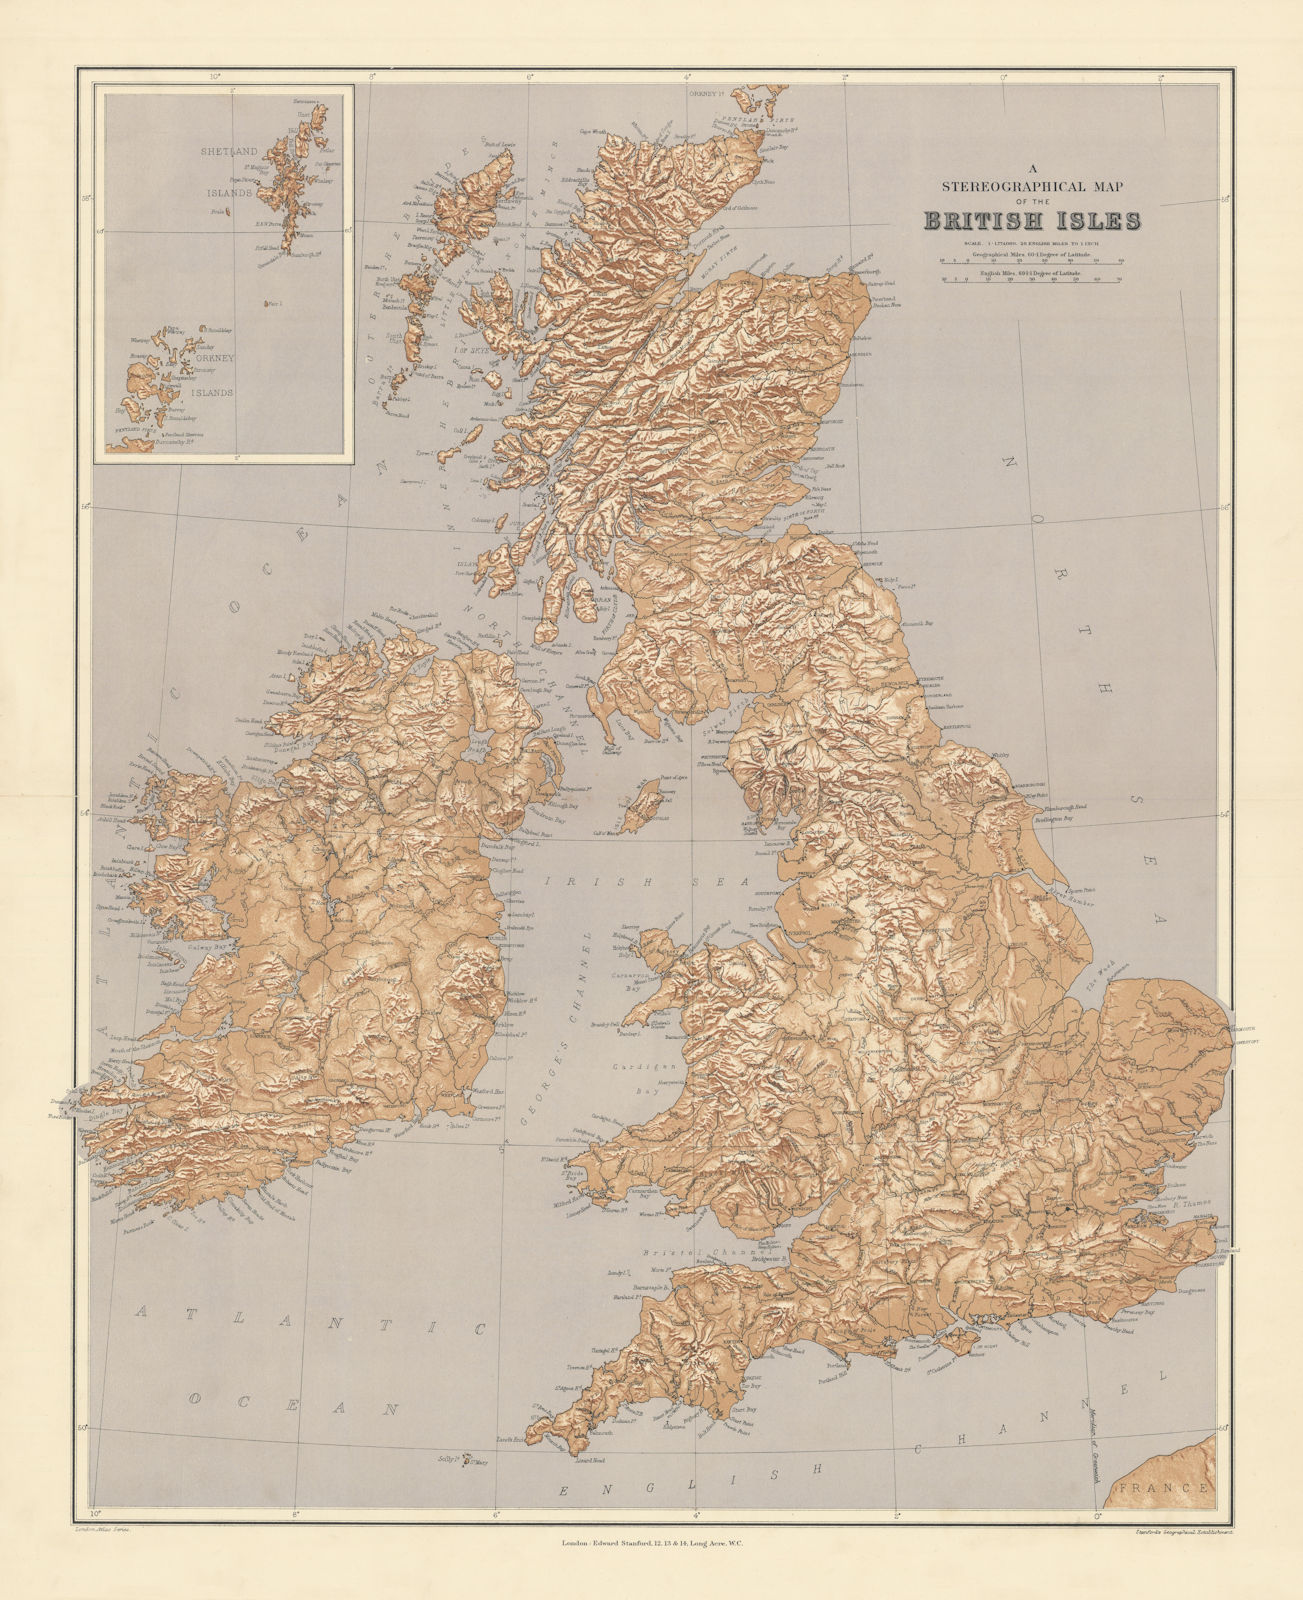 British Isles Stereographical. Mountains rivers. Large 65x52cm STANFORD 1904 map